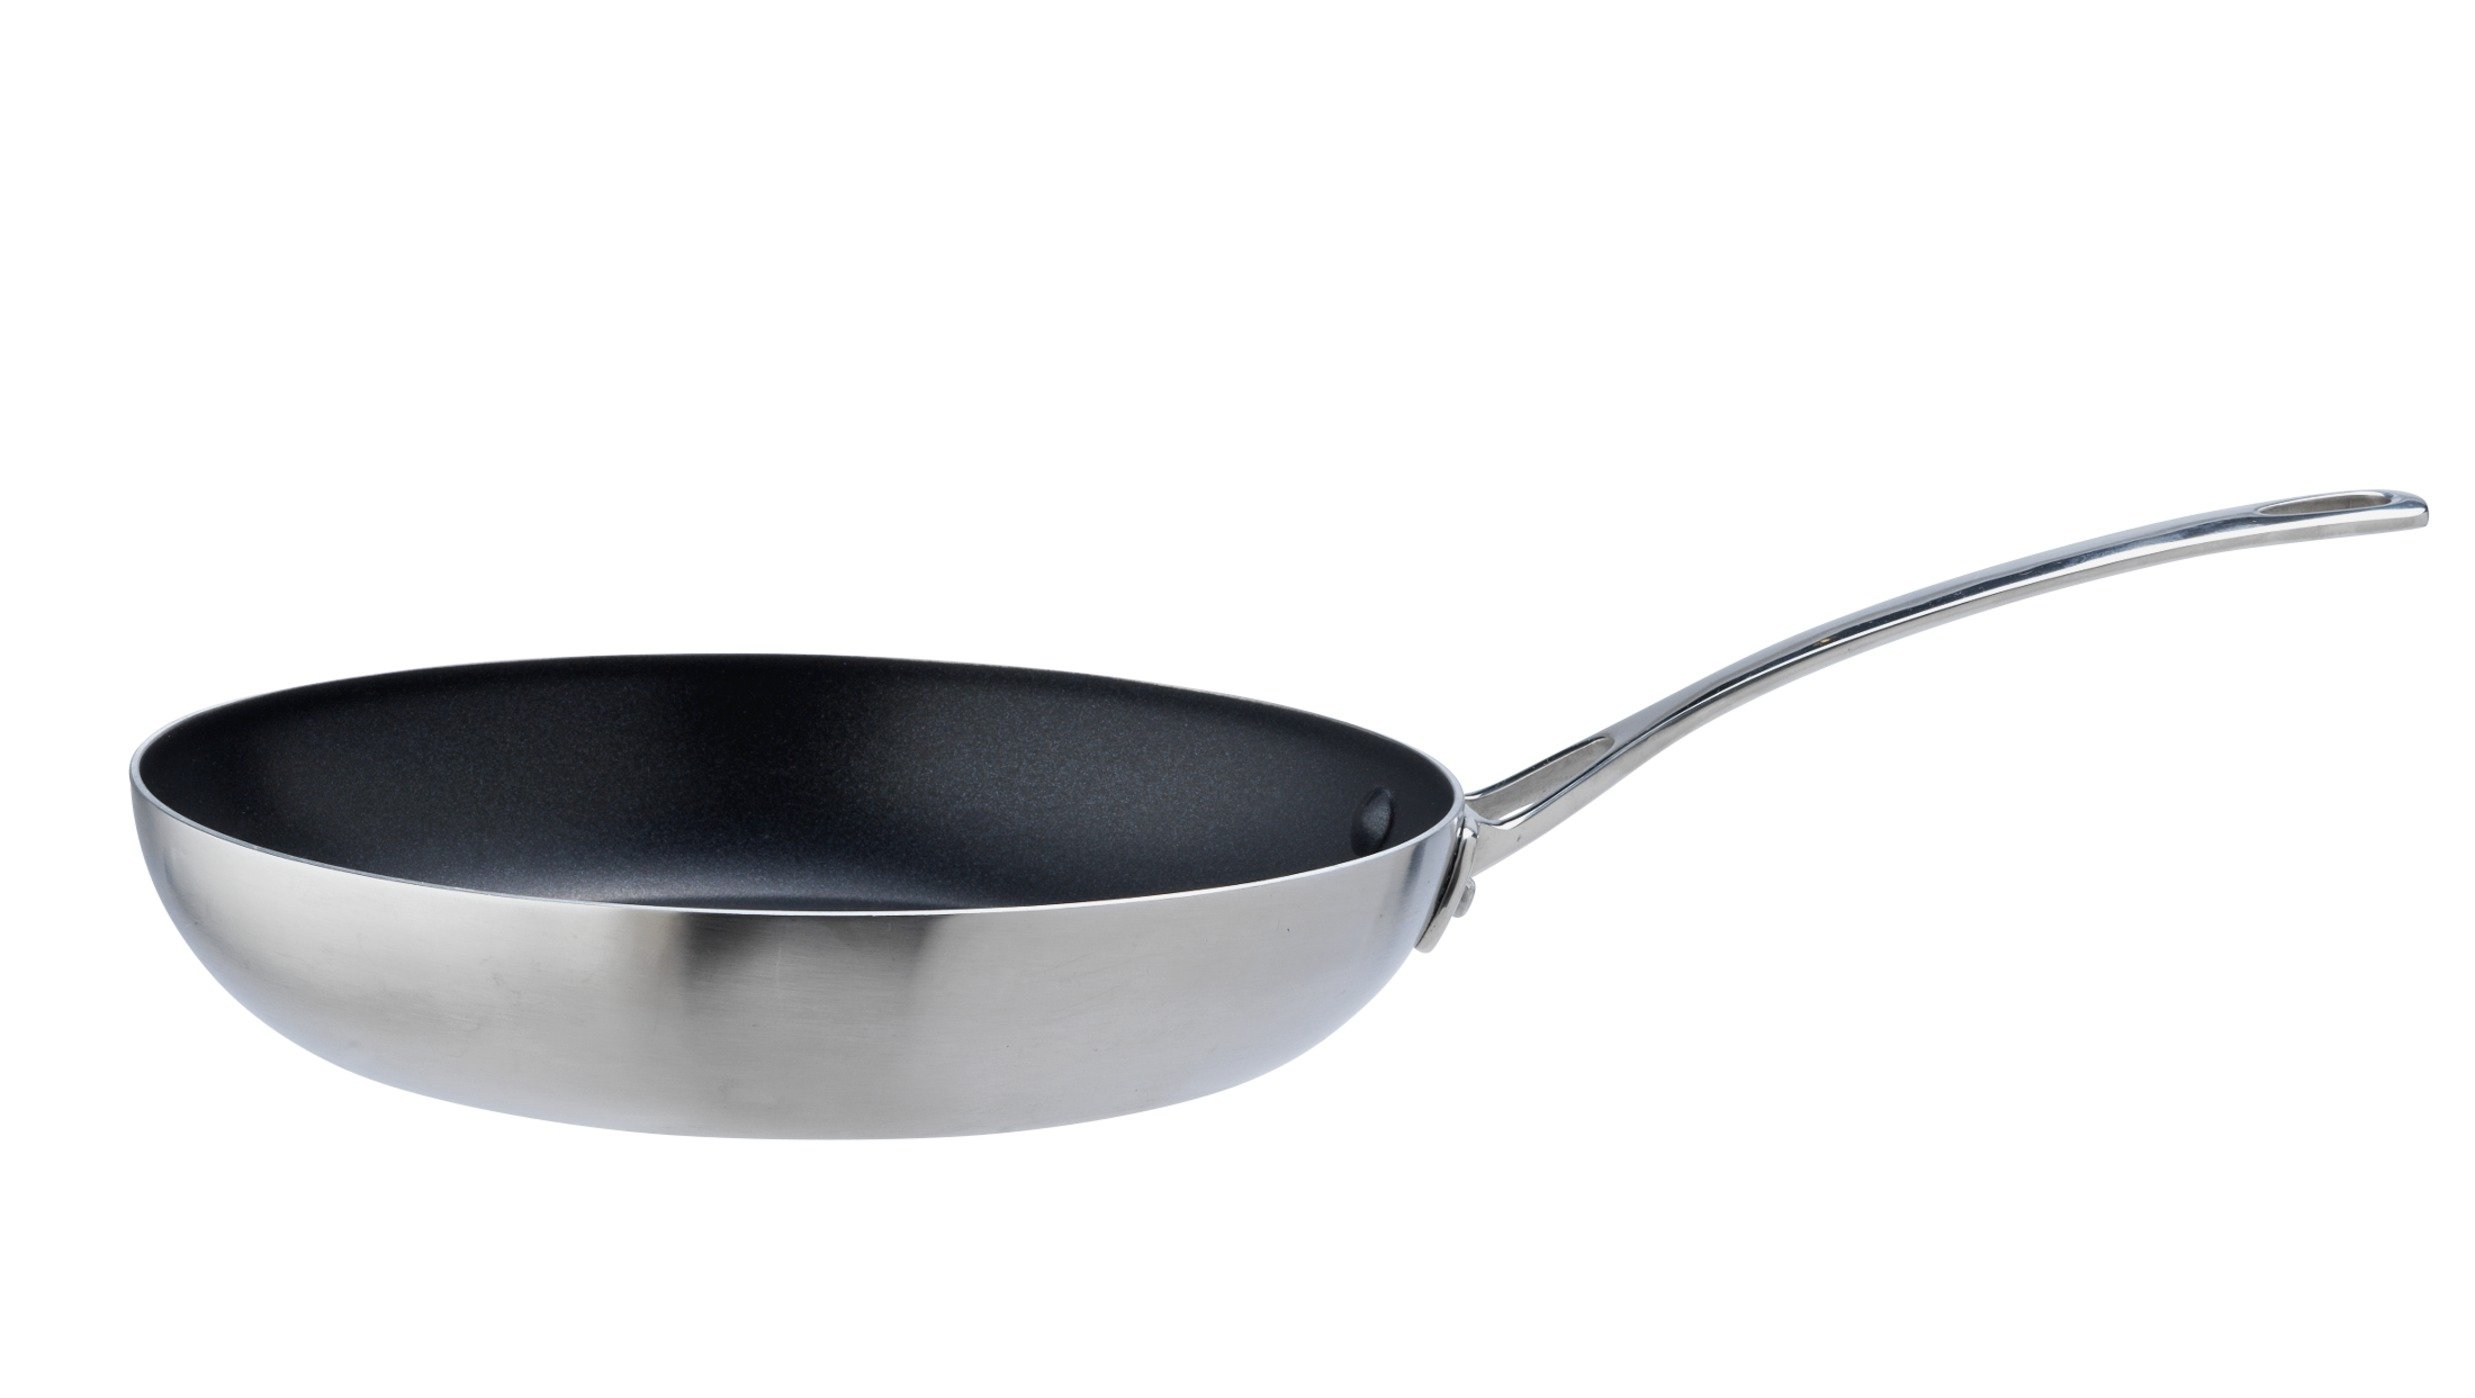 Sainsbury's Home Cooks Collection 24cm Triply Frying Pan